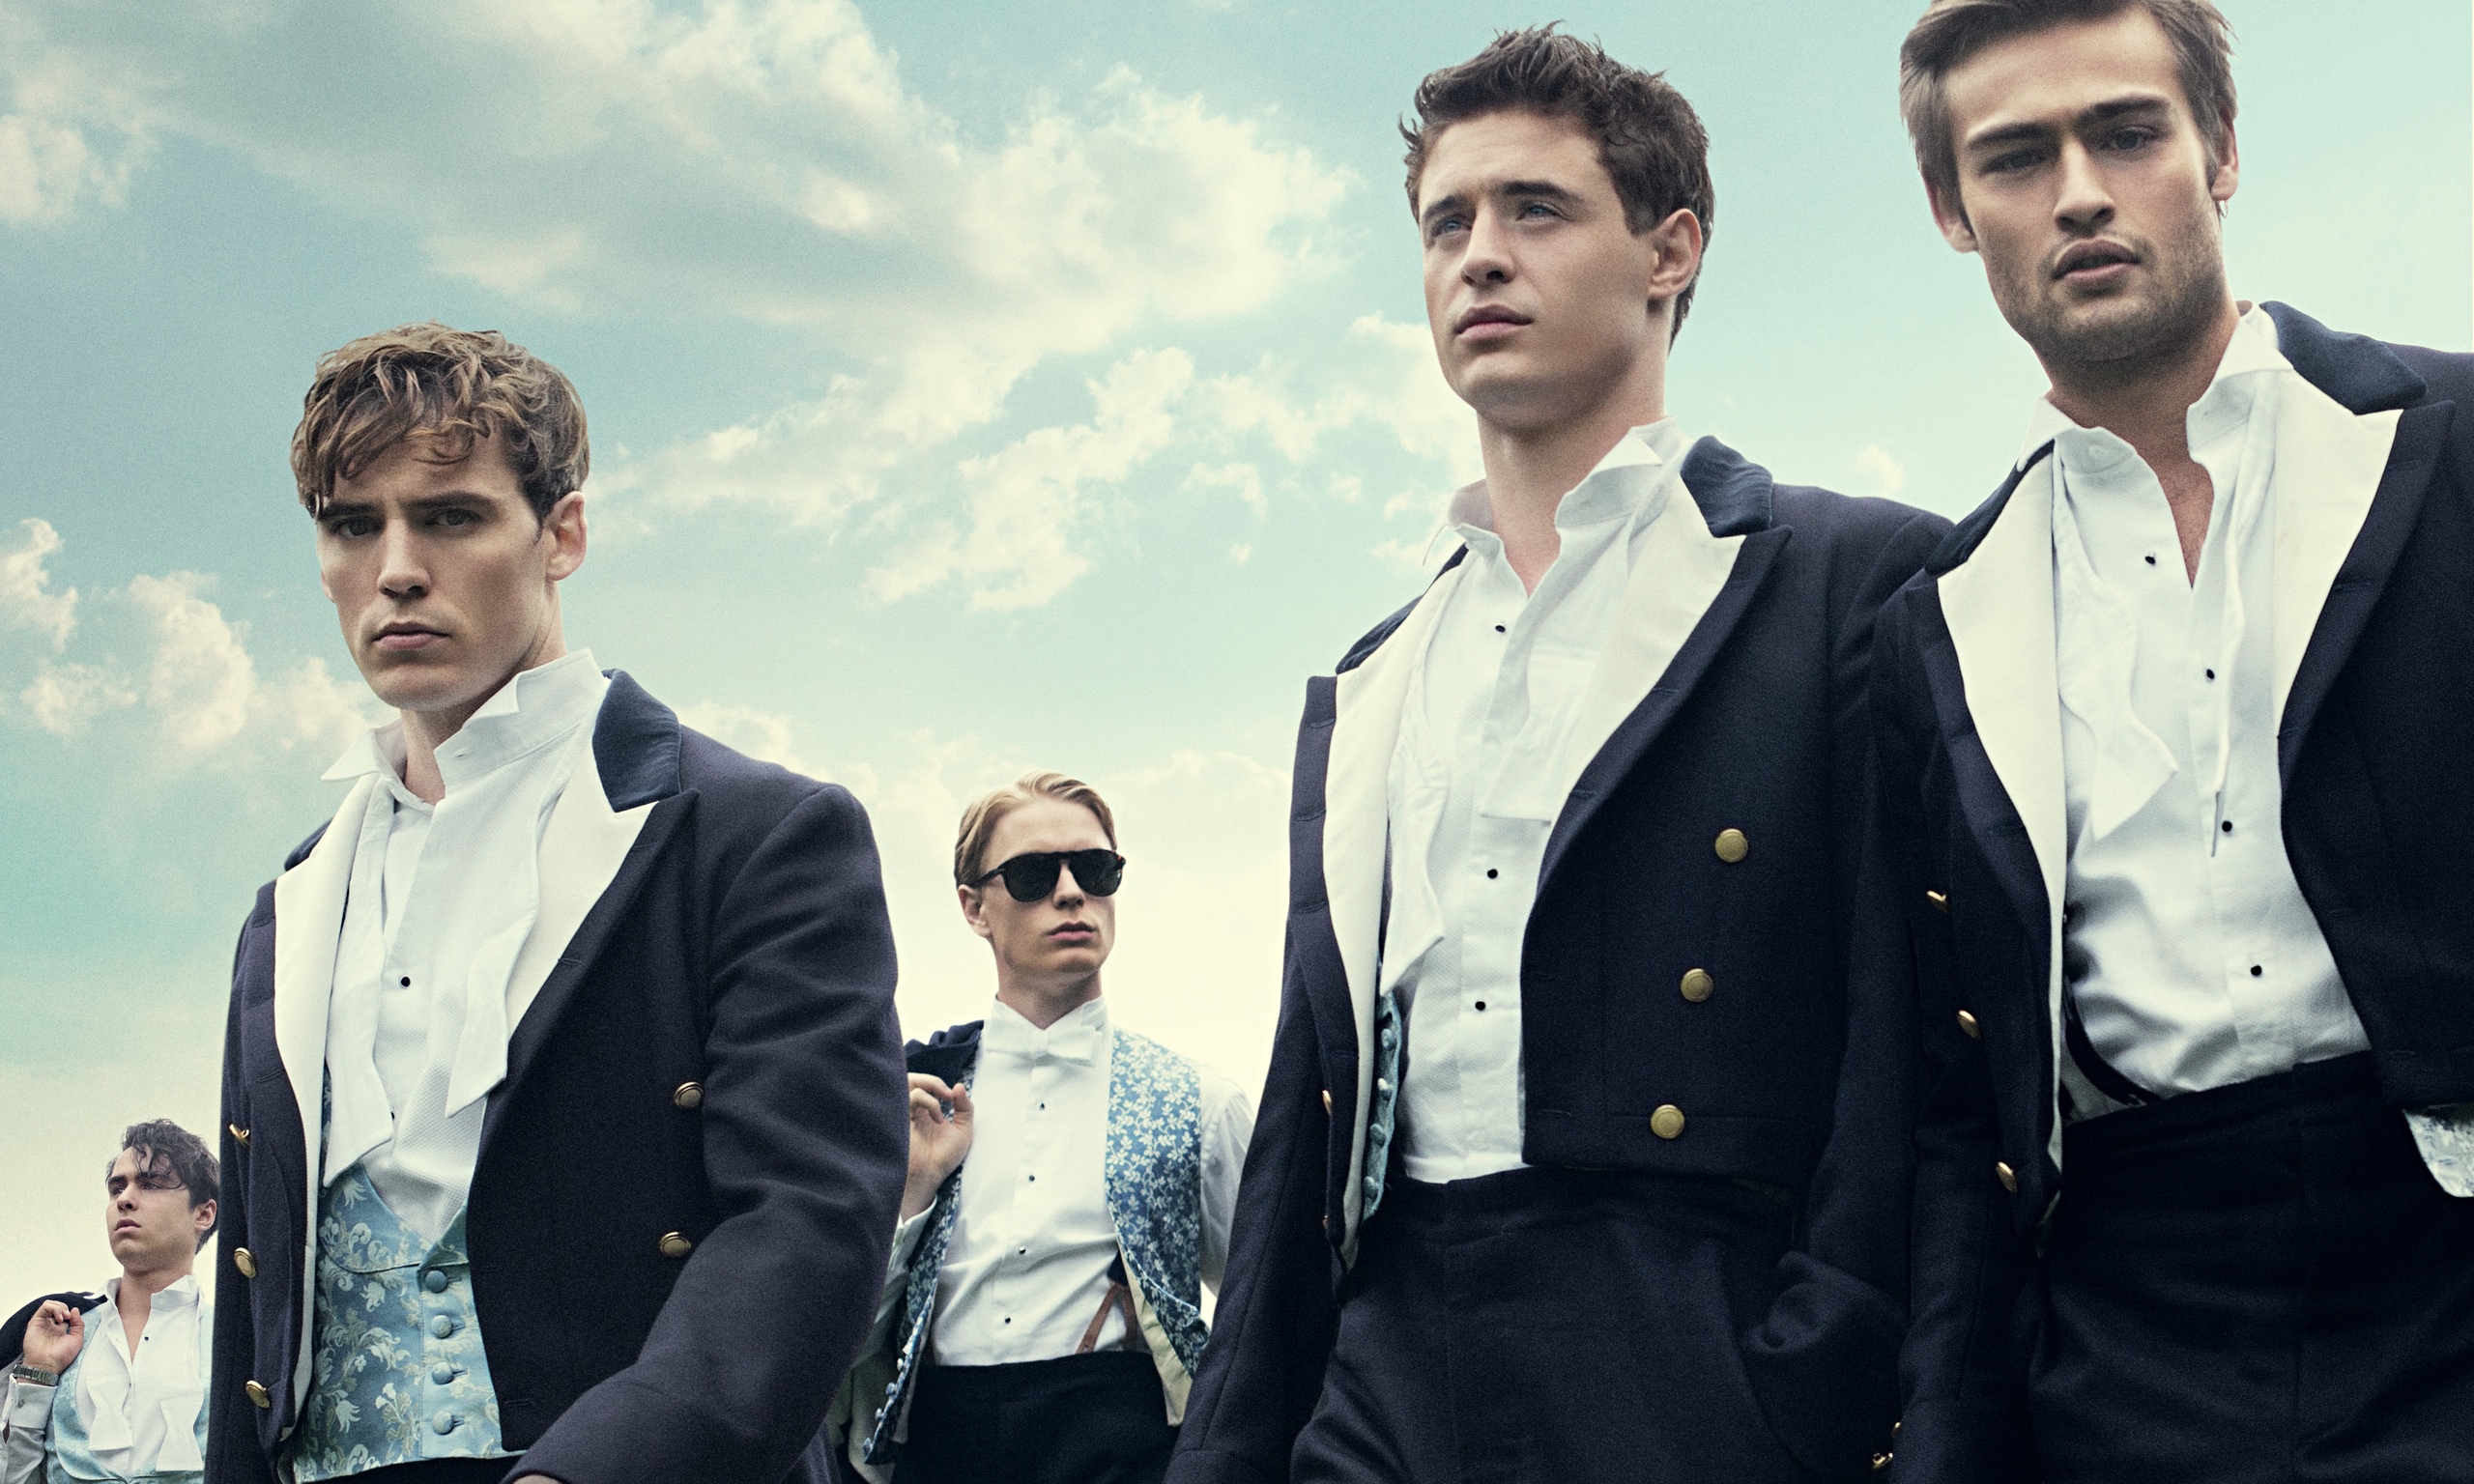 the-riot-club-review-laura-wade-s-bullingdon-club-style-bullies